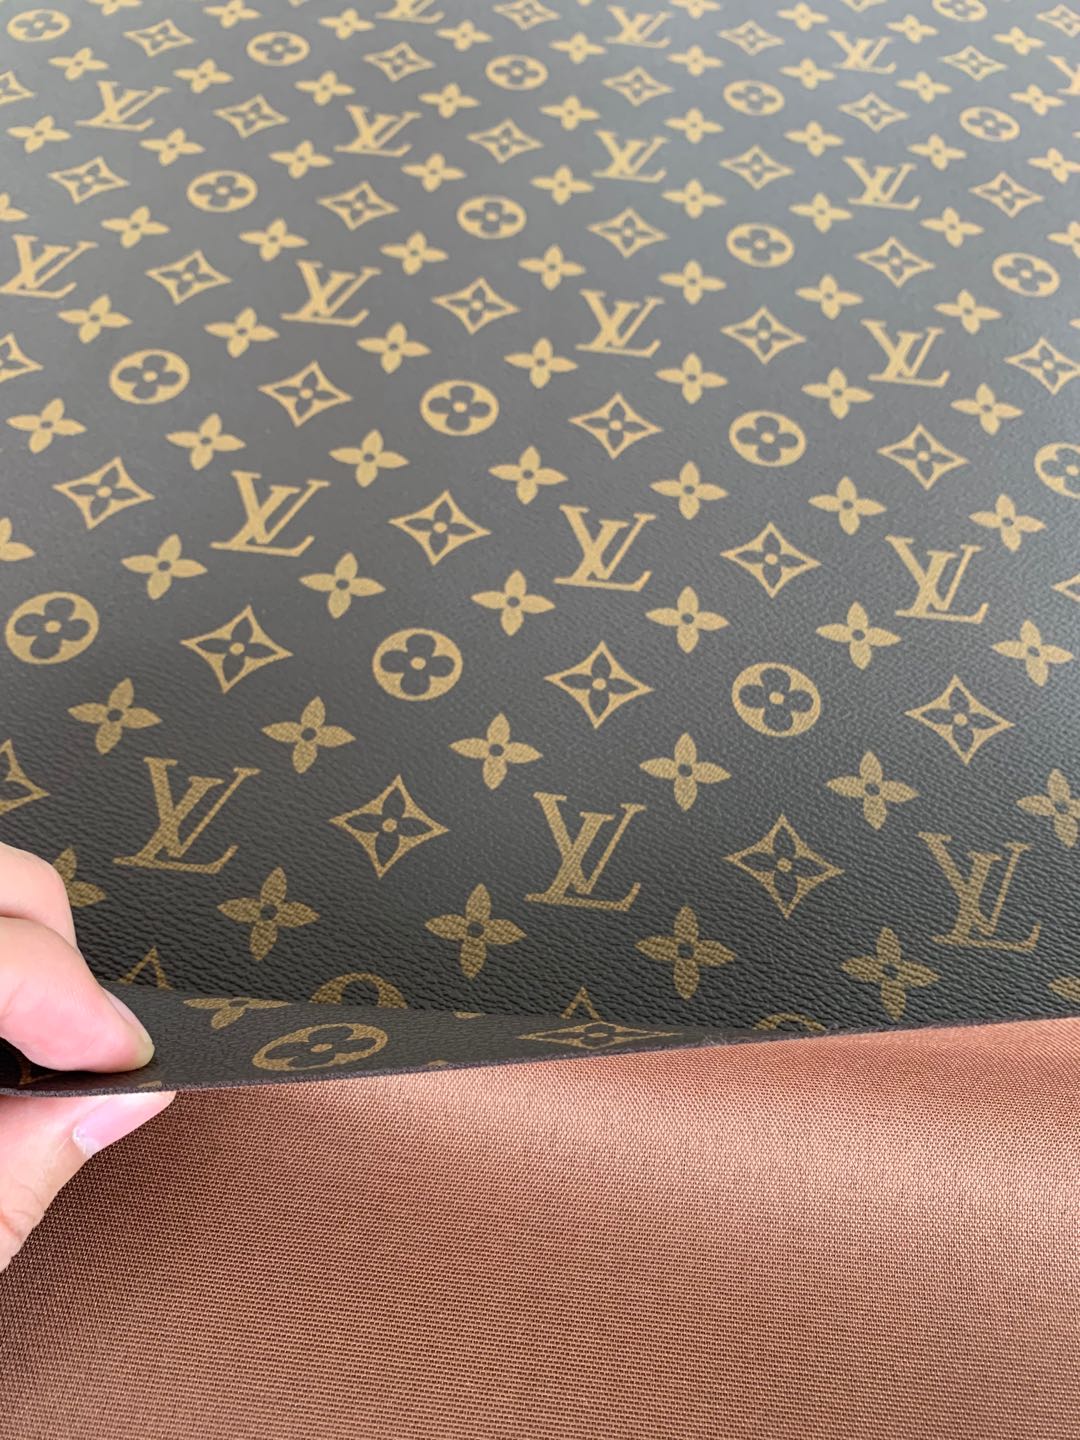 Black LV leather fabric with mini gold shiny patterns  Leather fabric  Gucci fabric Fabric